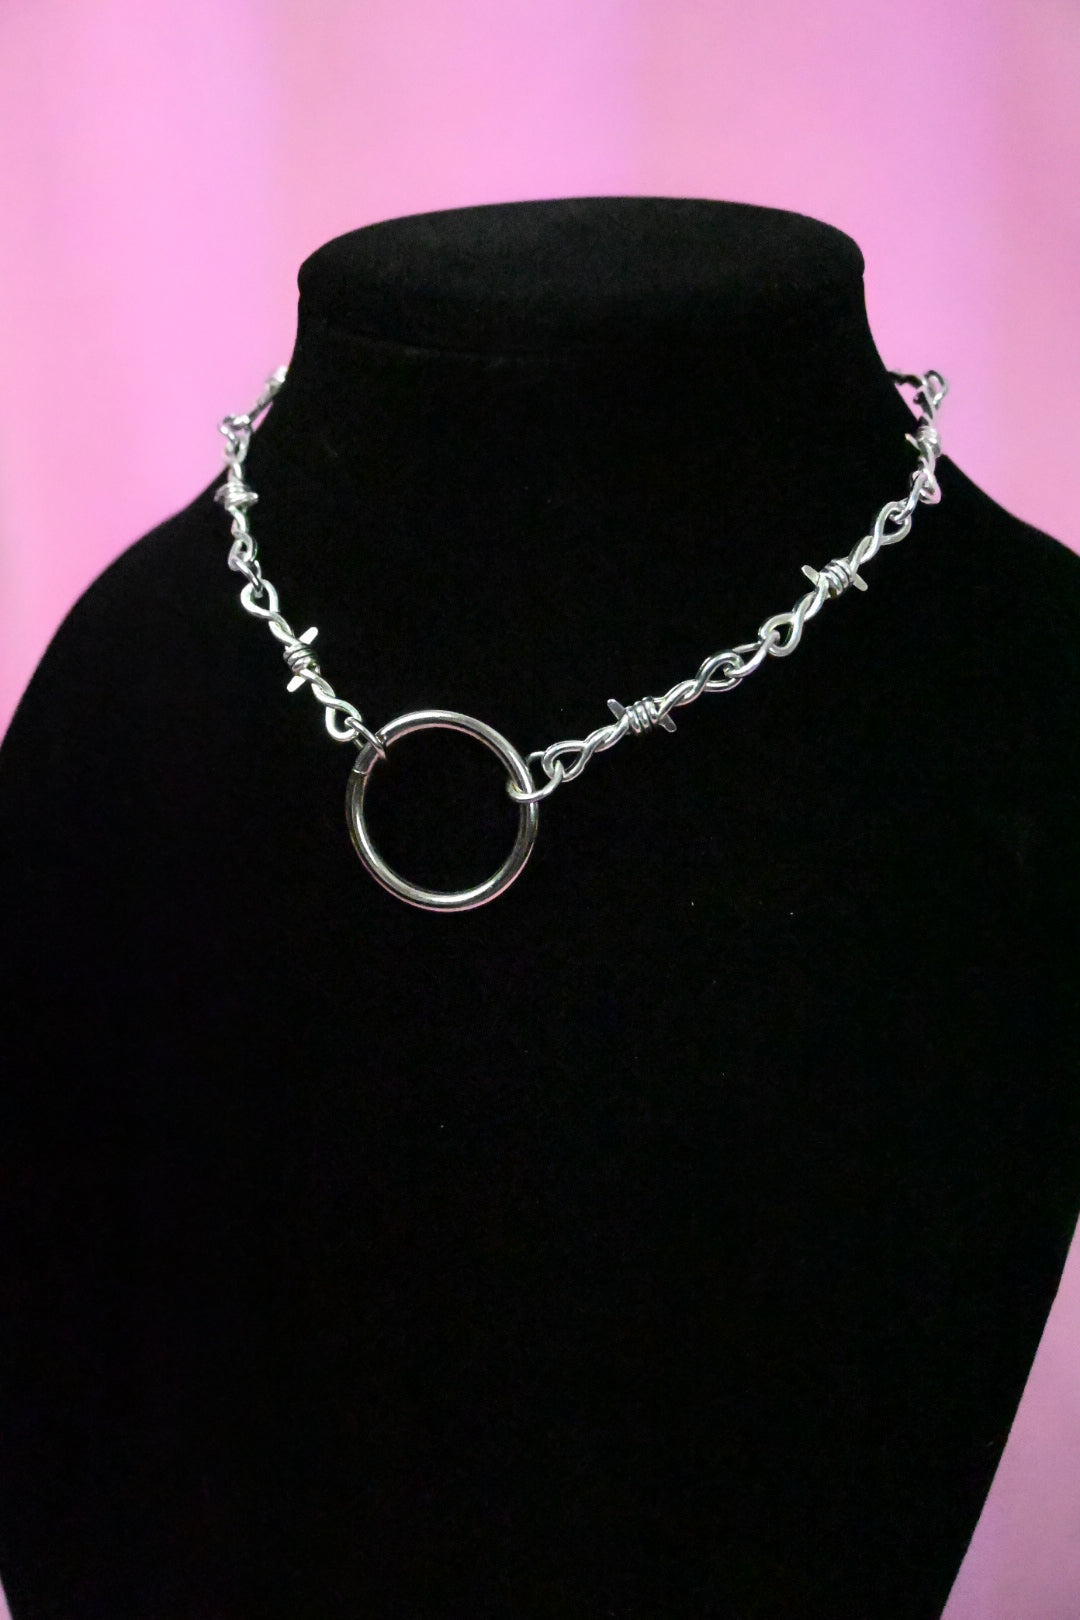 Barbed wire choker necklace